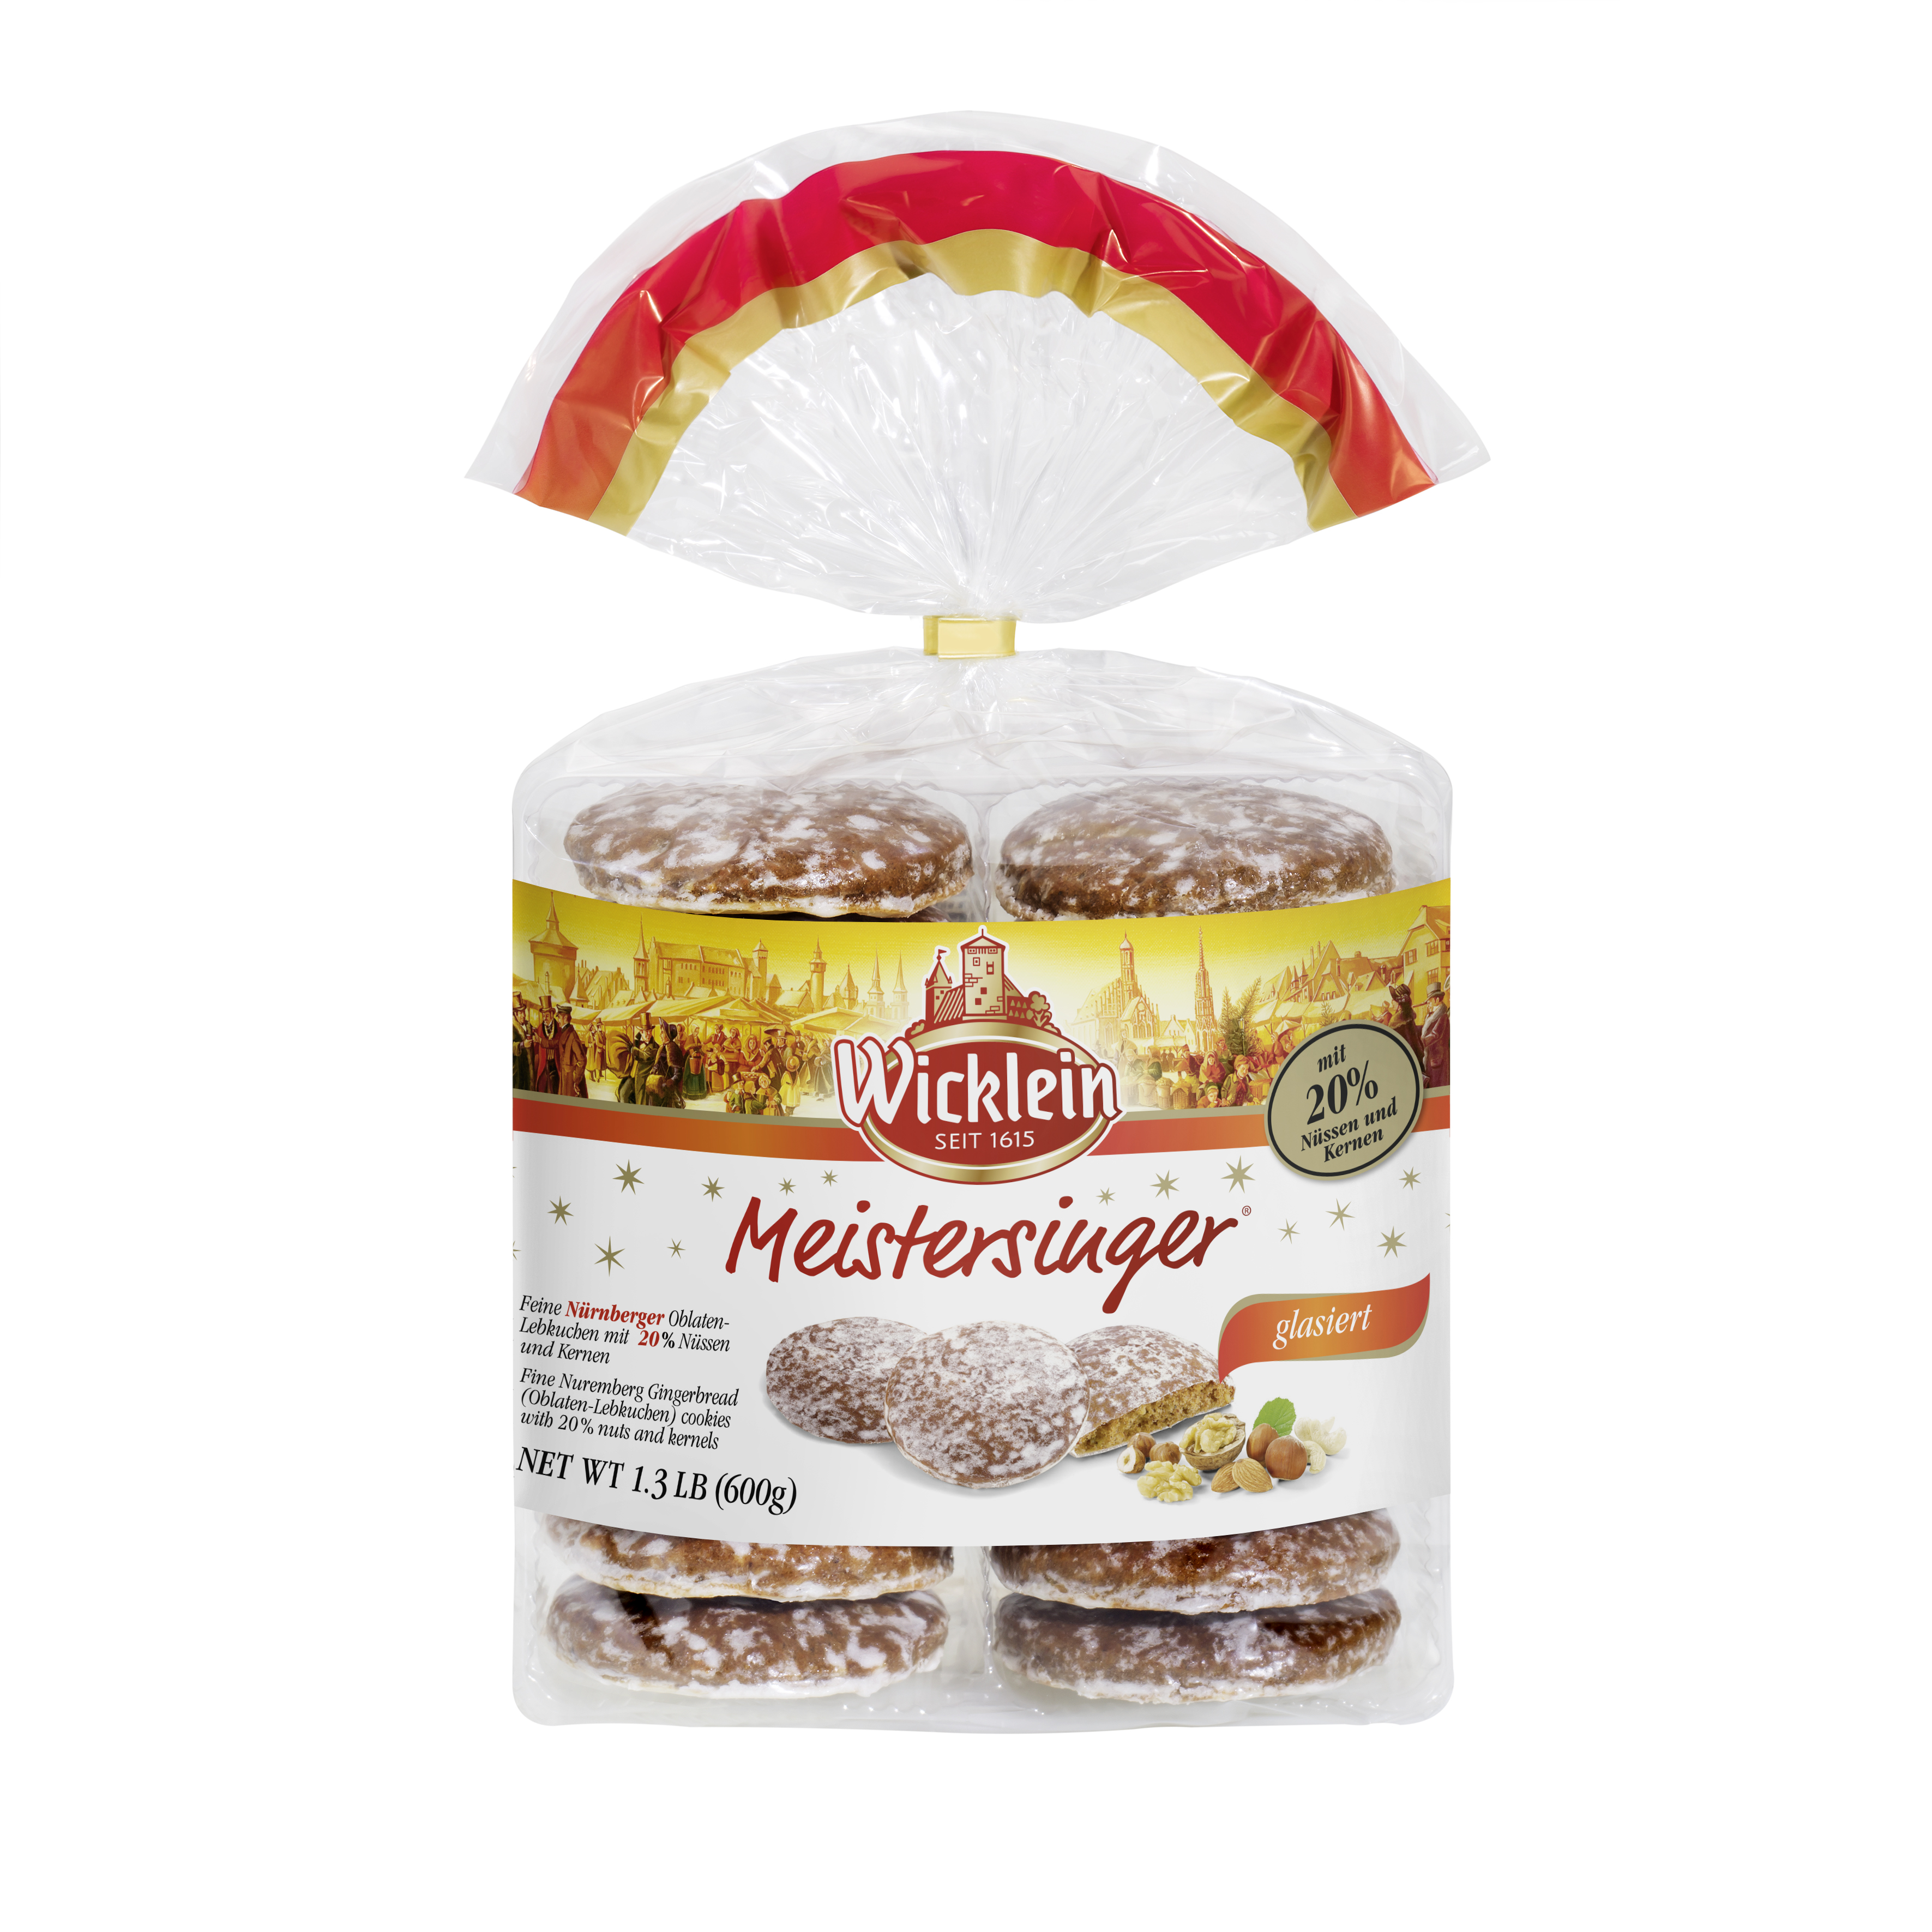 Fine Nuremberg Gingerbread (Oblaten-Lebkuchen) cookies with 20 % nuts and kernels